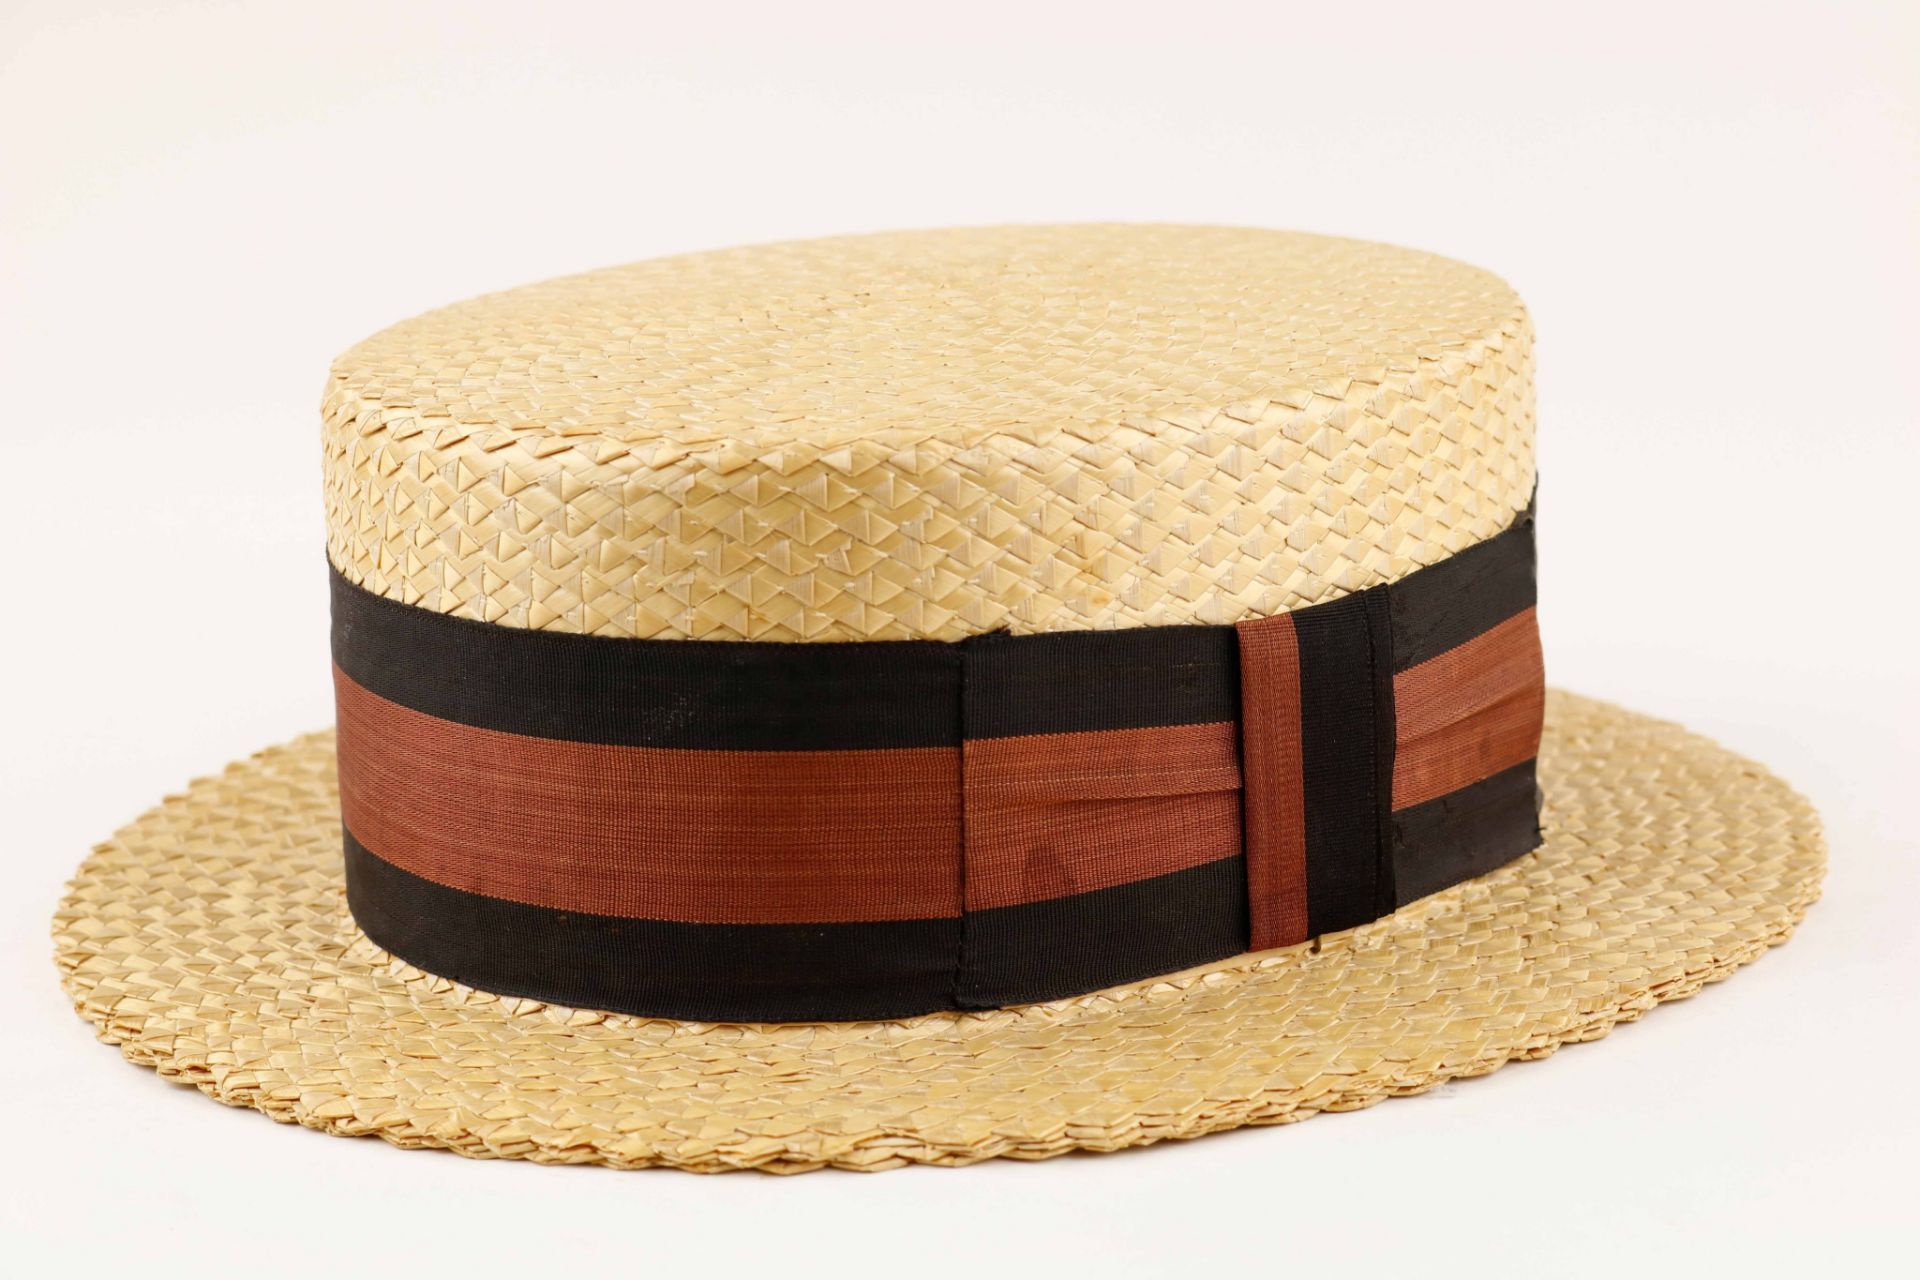 GEORGE HERMAN 'BABE' RUTH'S STRAW BOATER HAT